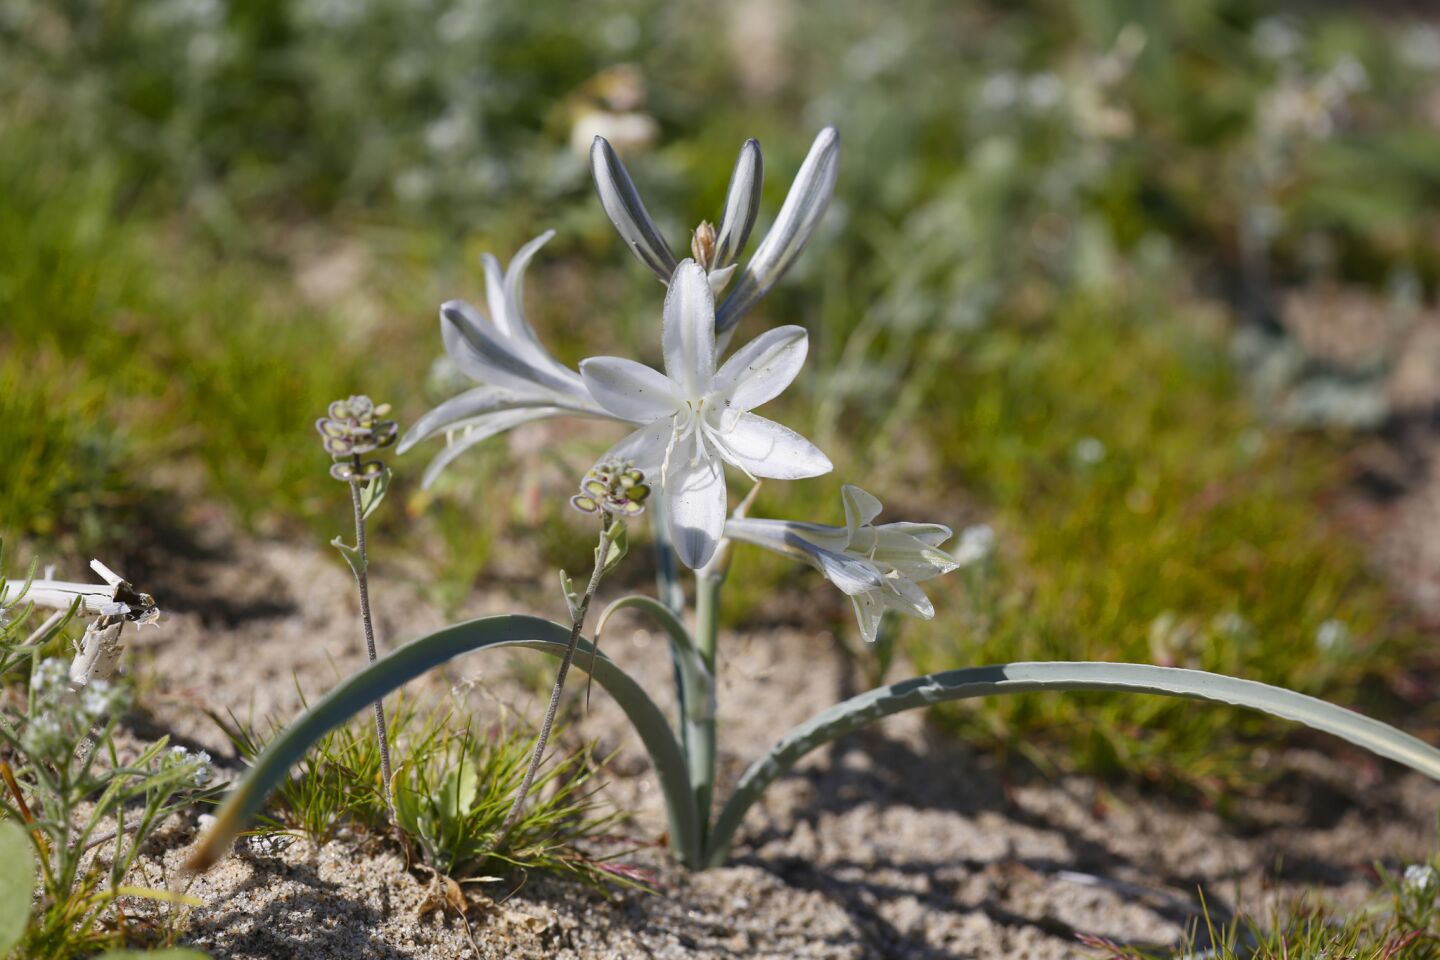 The desert lily flowers at Anza-Borrego Desert are beginning to bloom, with the full bloom expected in the next week or two.